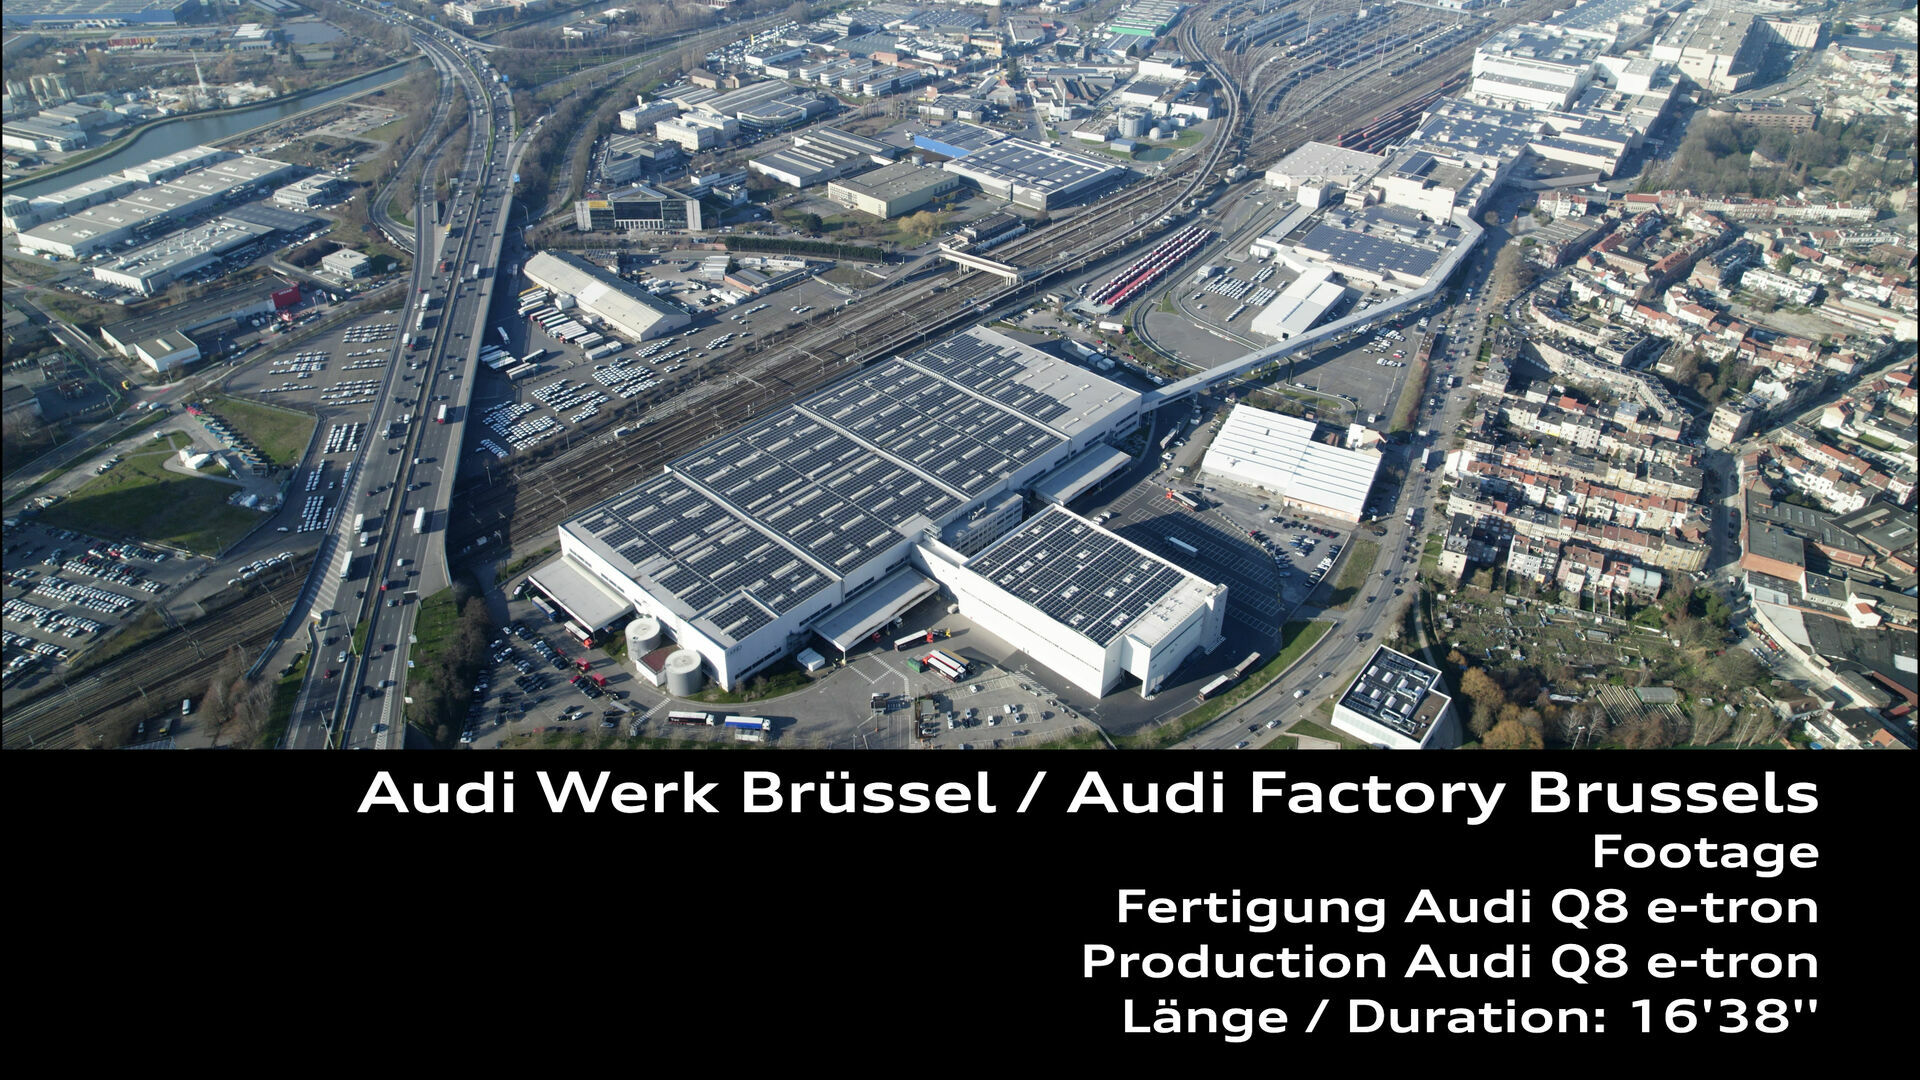 Footage: Production at Audi Brussels